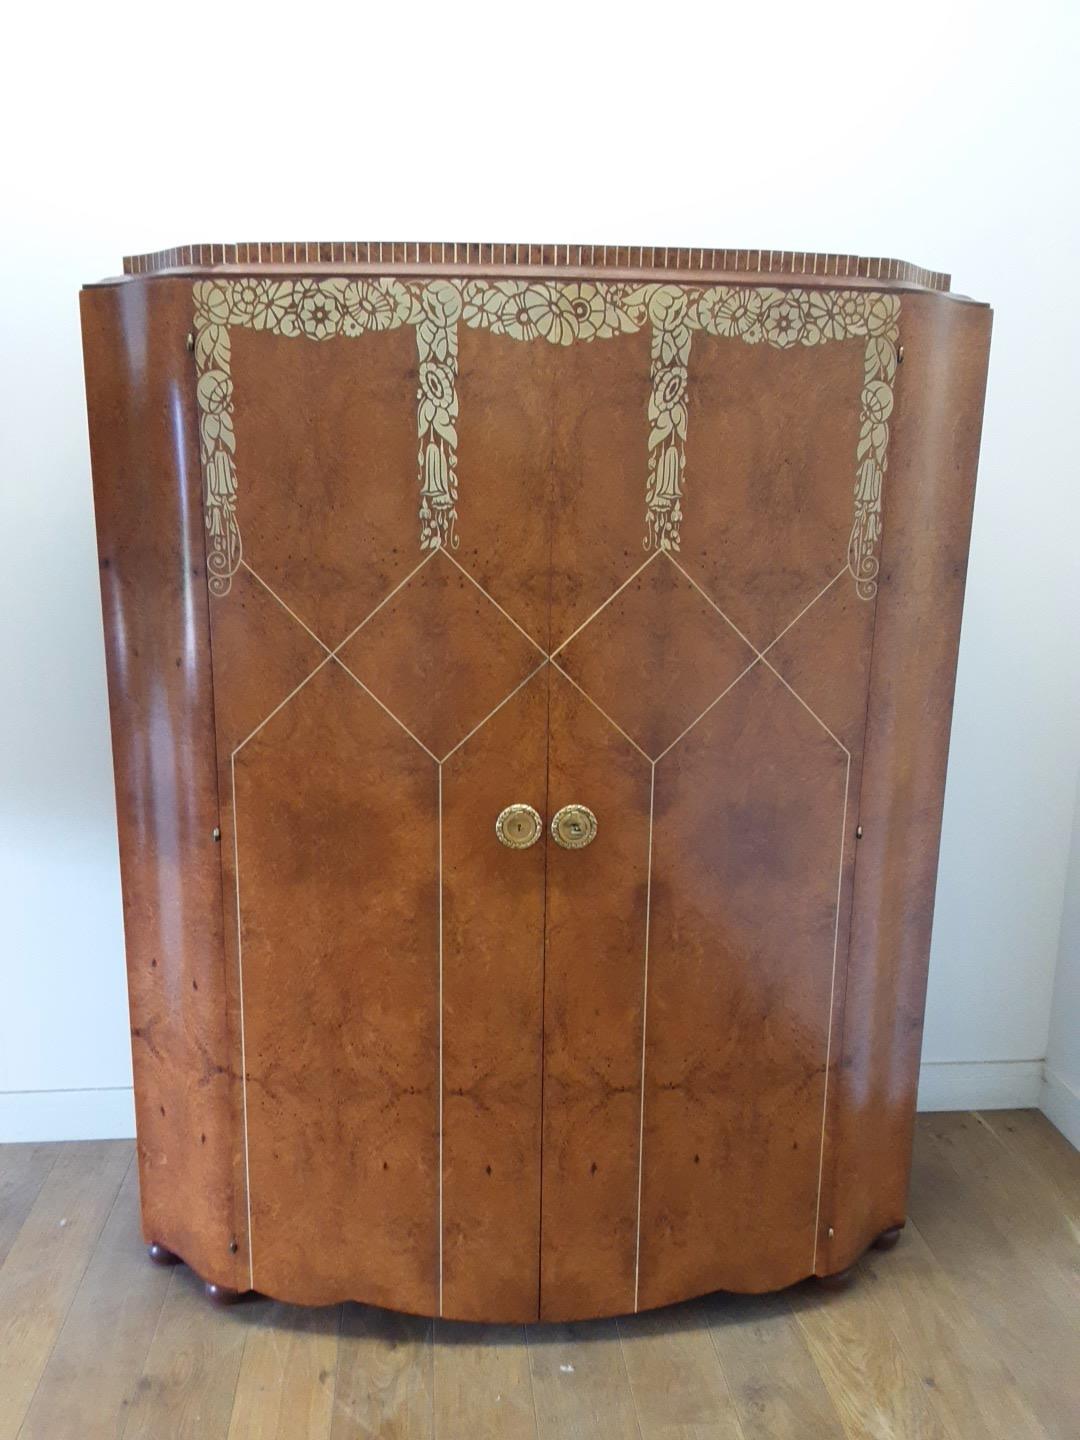 Art Deco Bedroom Suite by Mercier Freres in Satin Maple with Inlaid Floral Motif For Sale 5